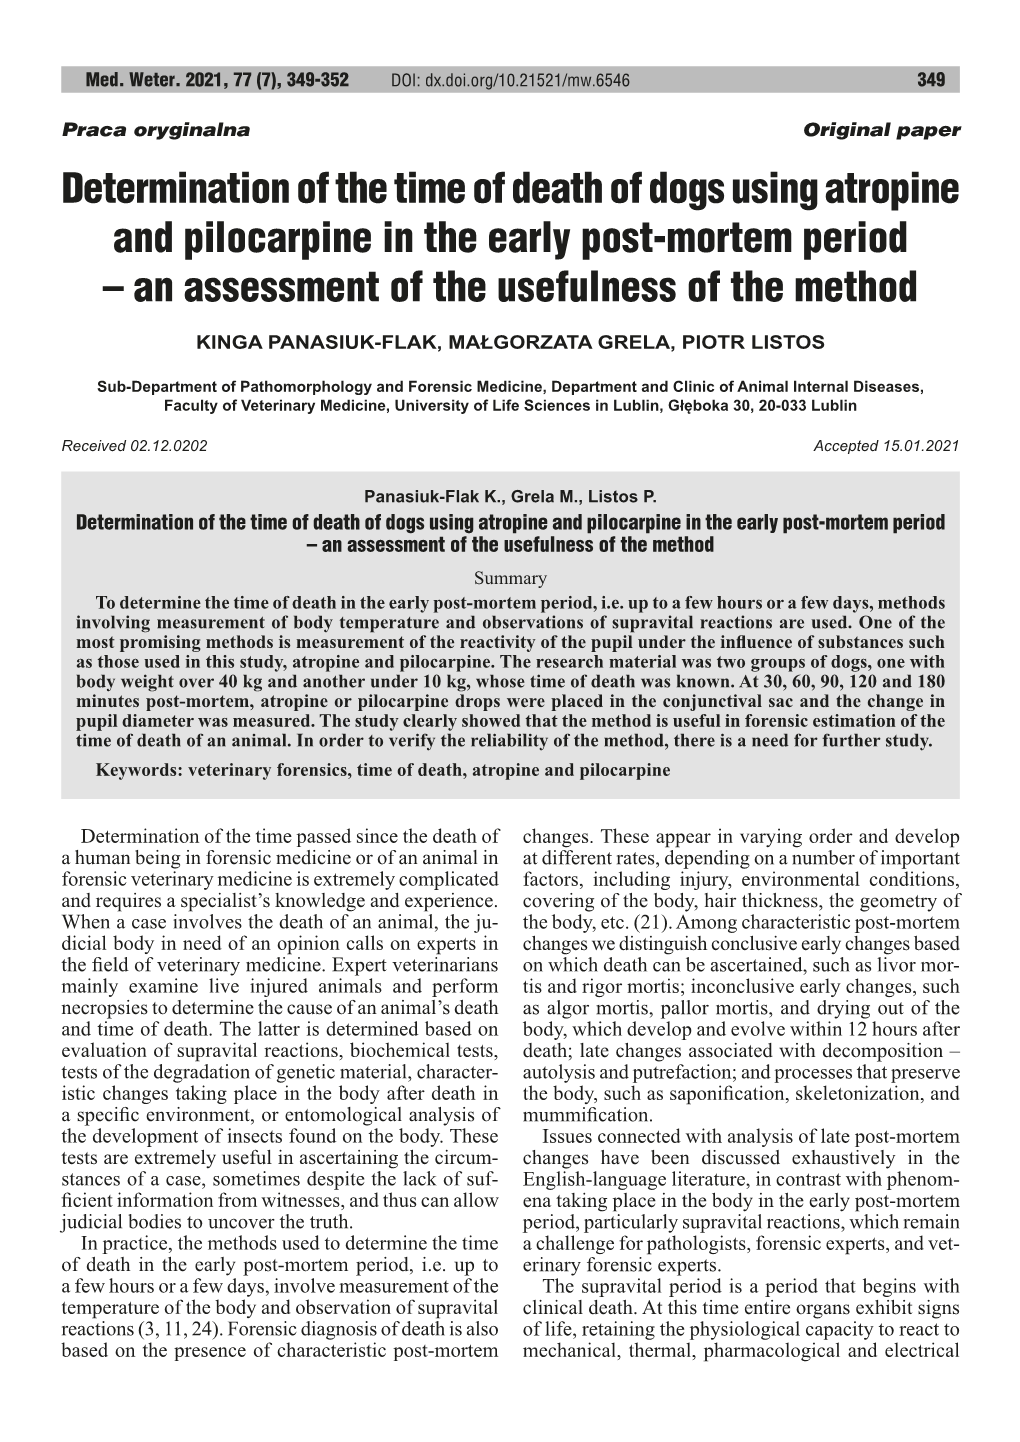 Determination of the Time of Death of Dogs Using Atropine and Pilocarpine in the Early Post-Mortem Period – an Assessment of the Usefulness of the Method